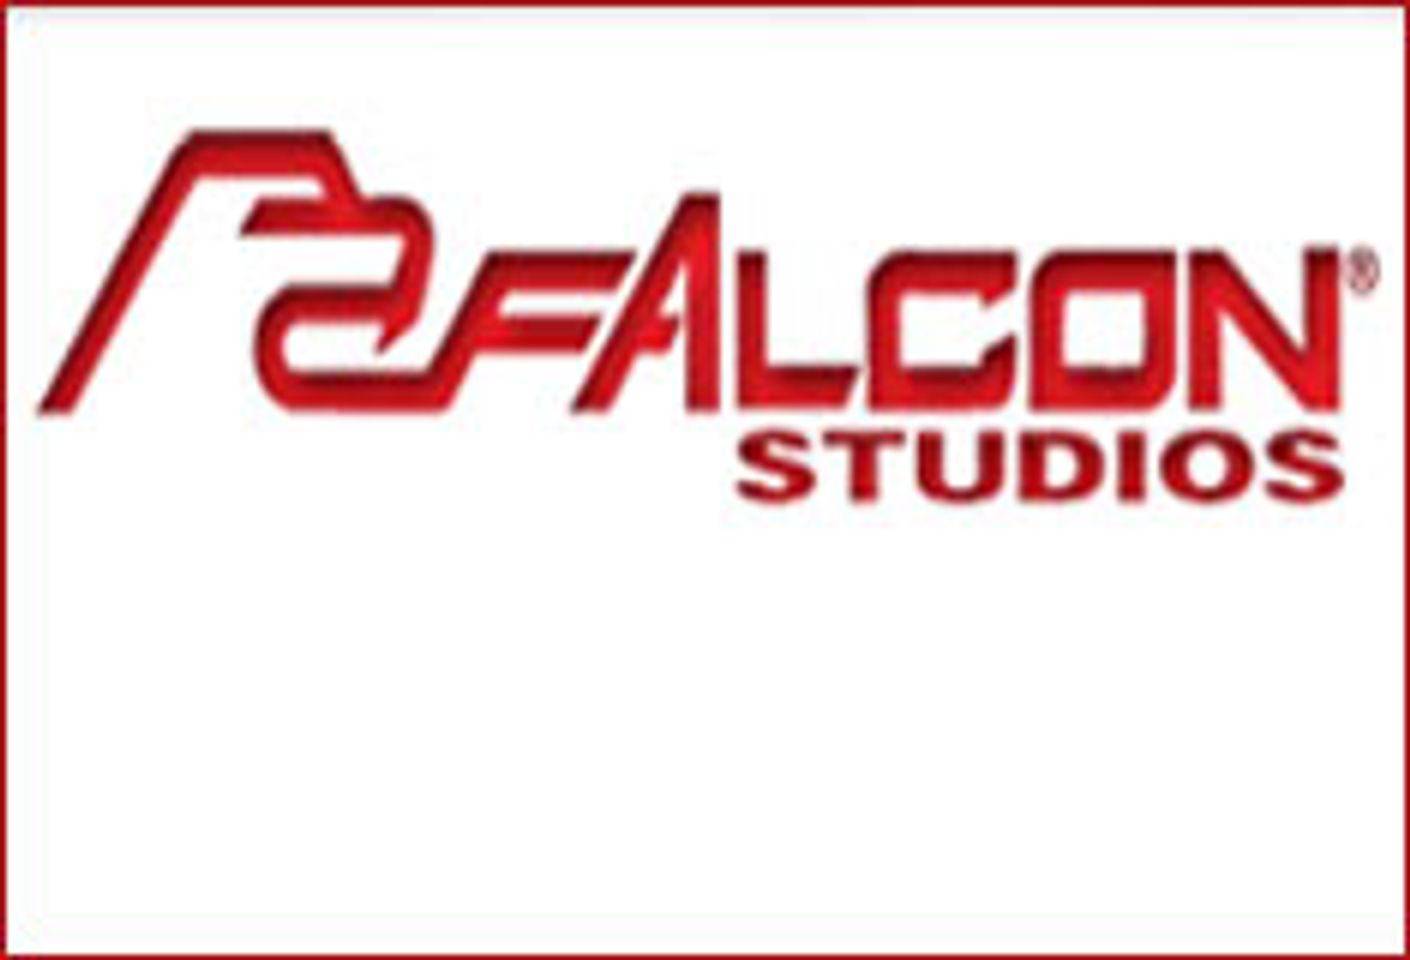 Falcon Announces Distribution Deal with UK Products Company